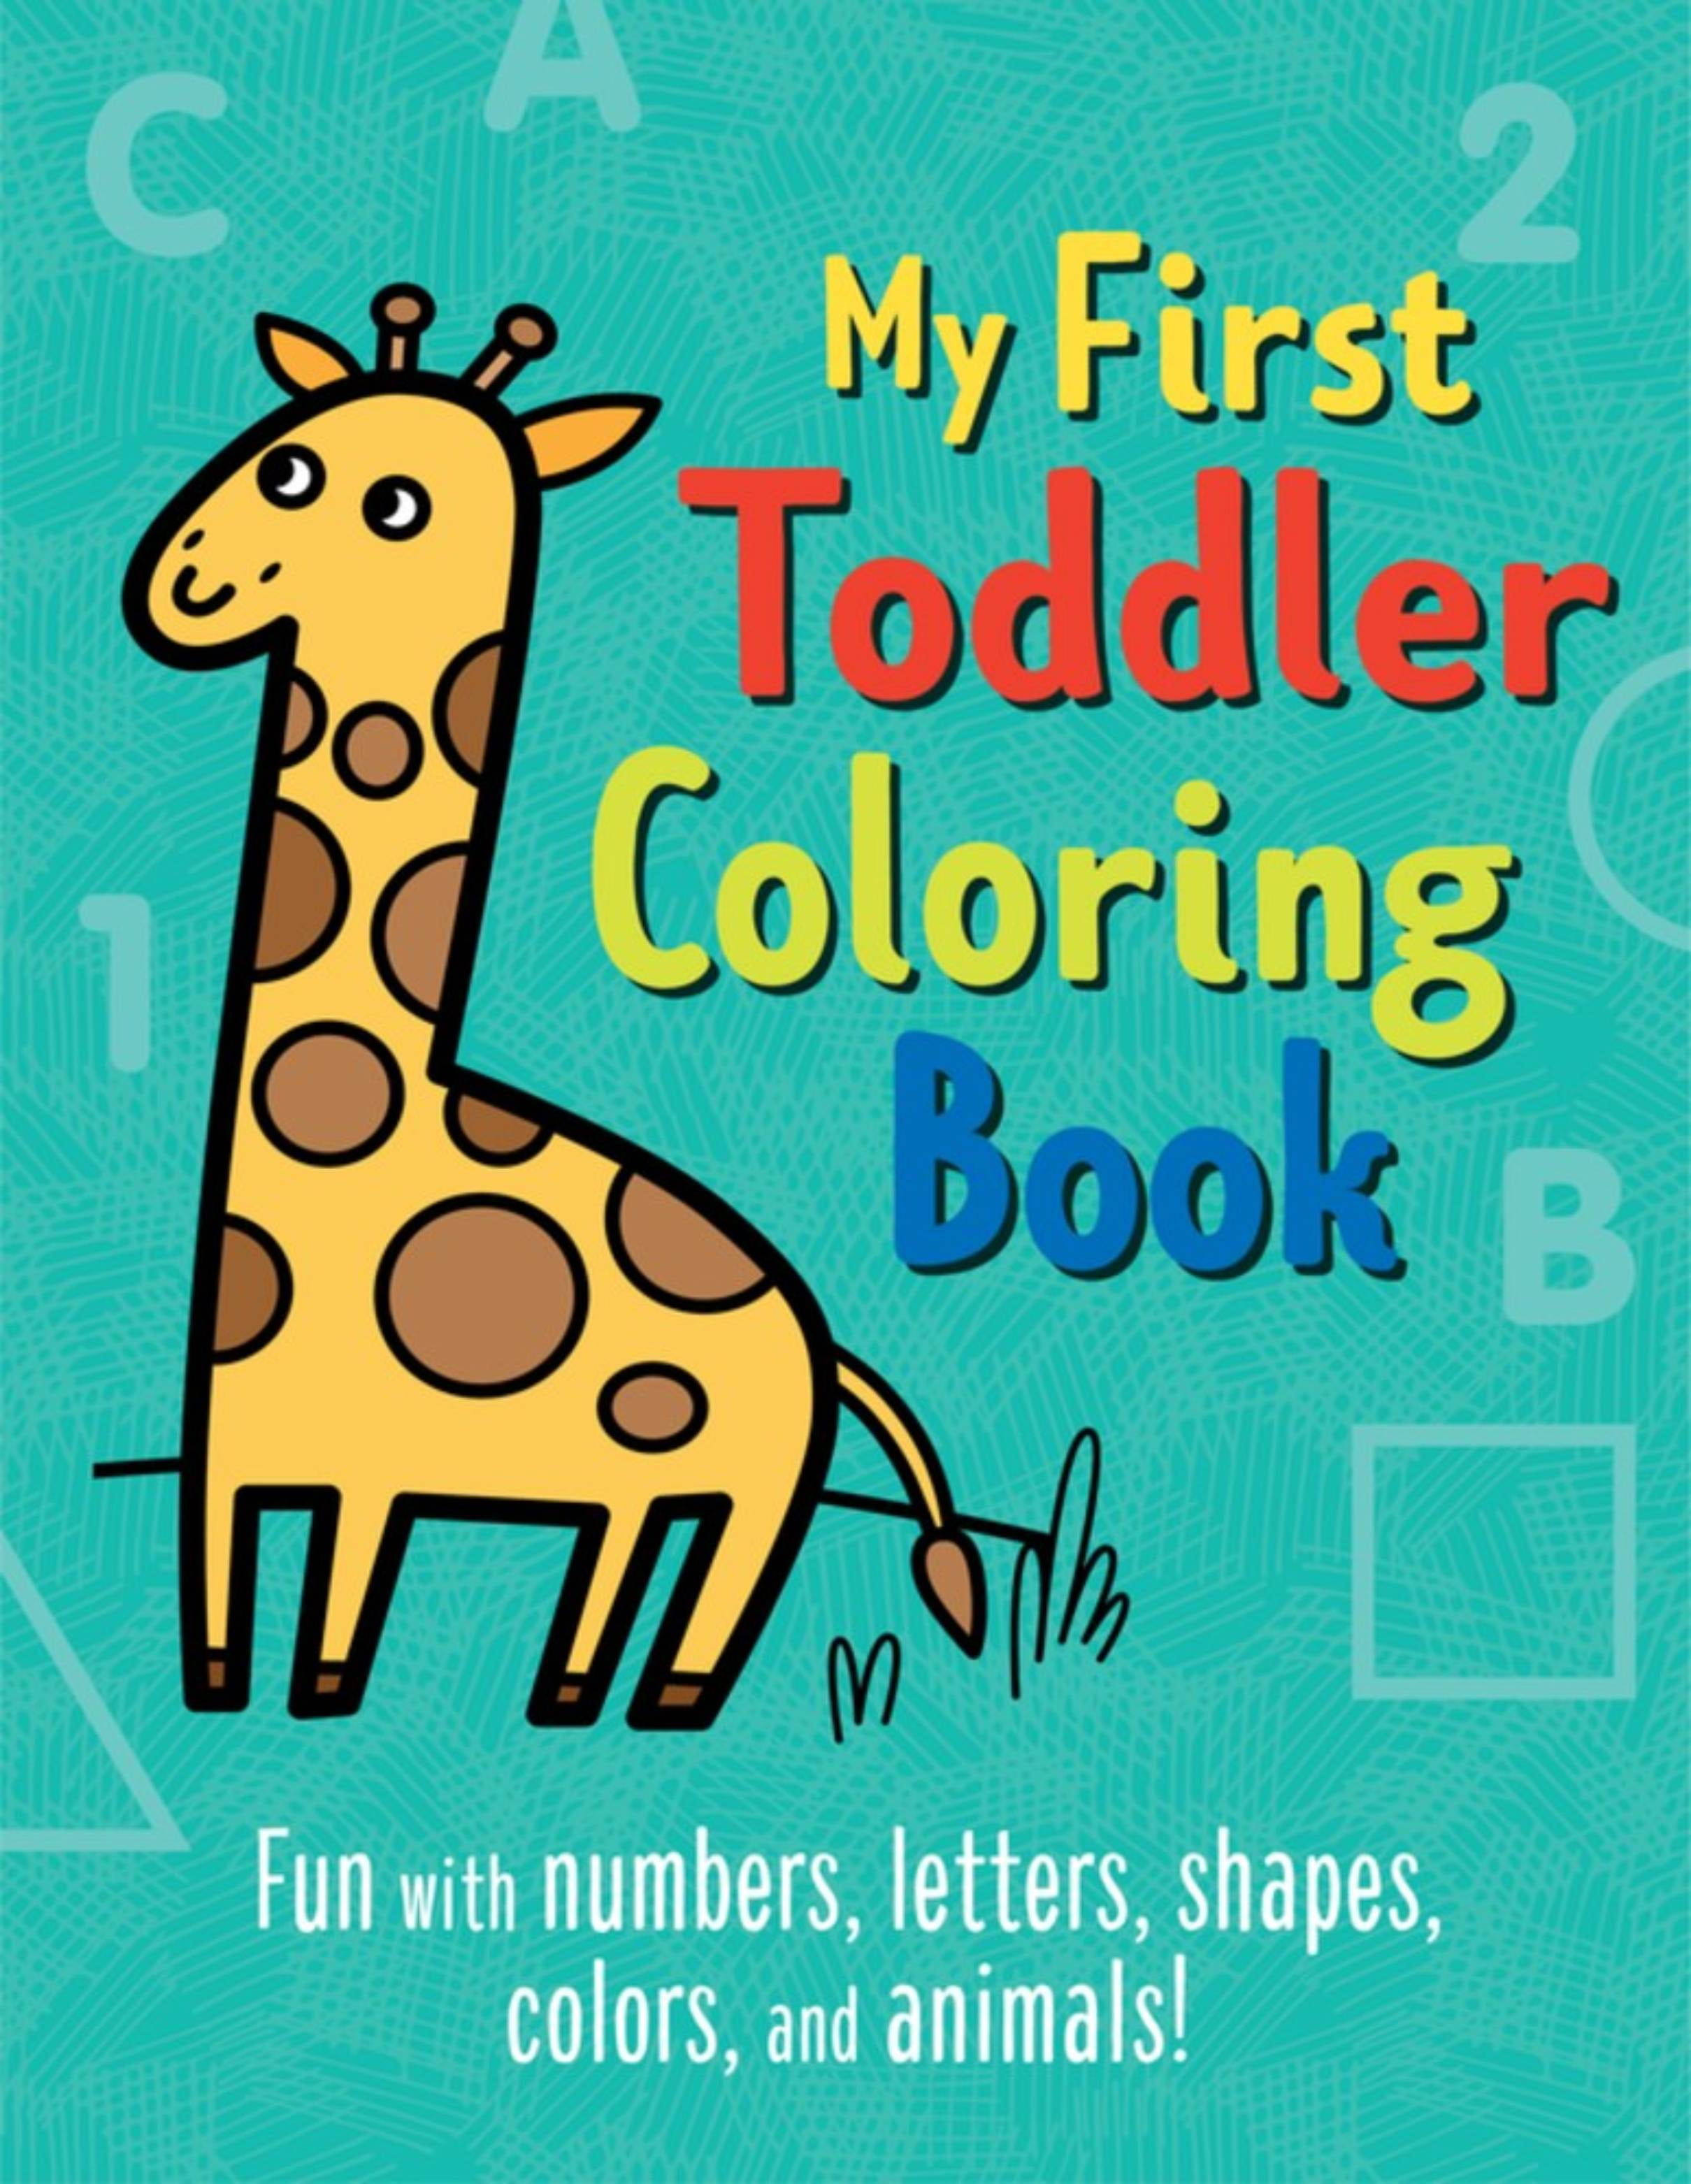 My First Yellow Children's Colouring Book Fun Kids Paint Book Activity Book 